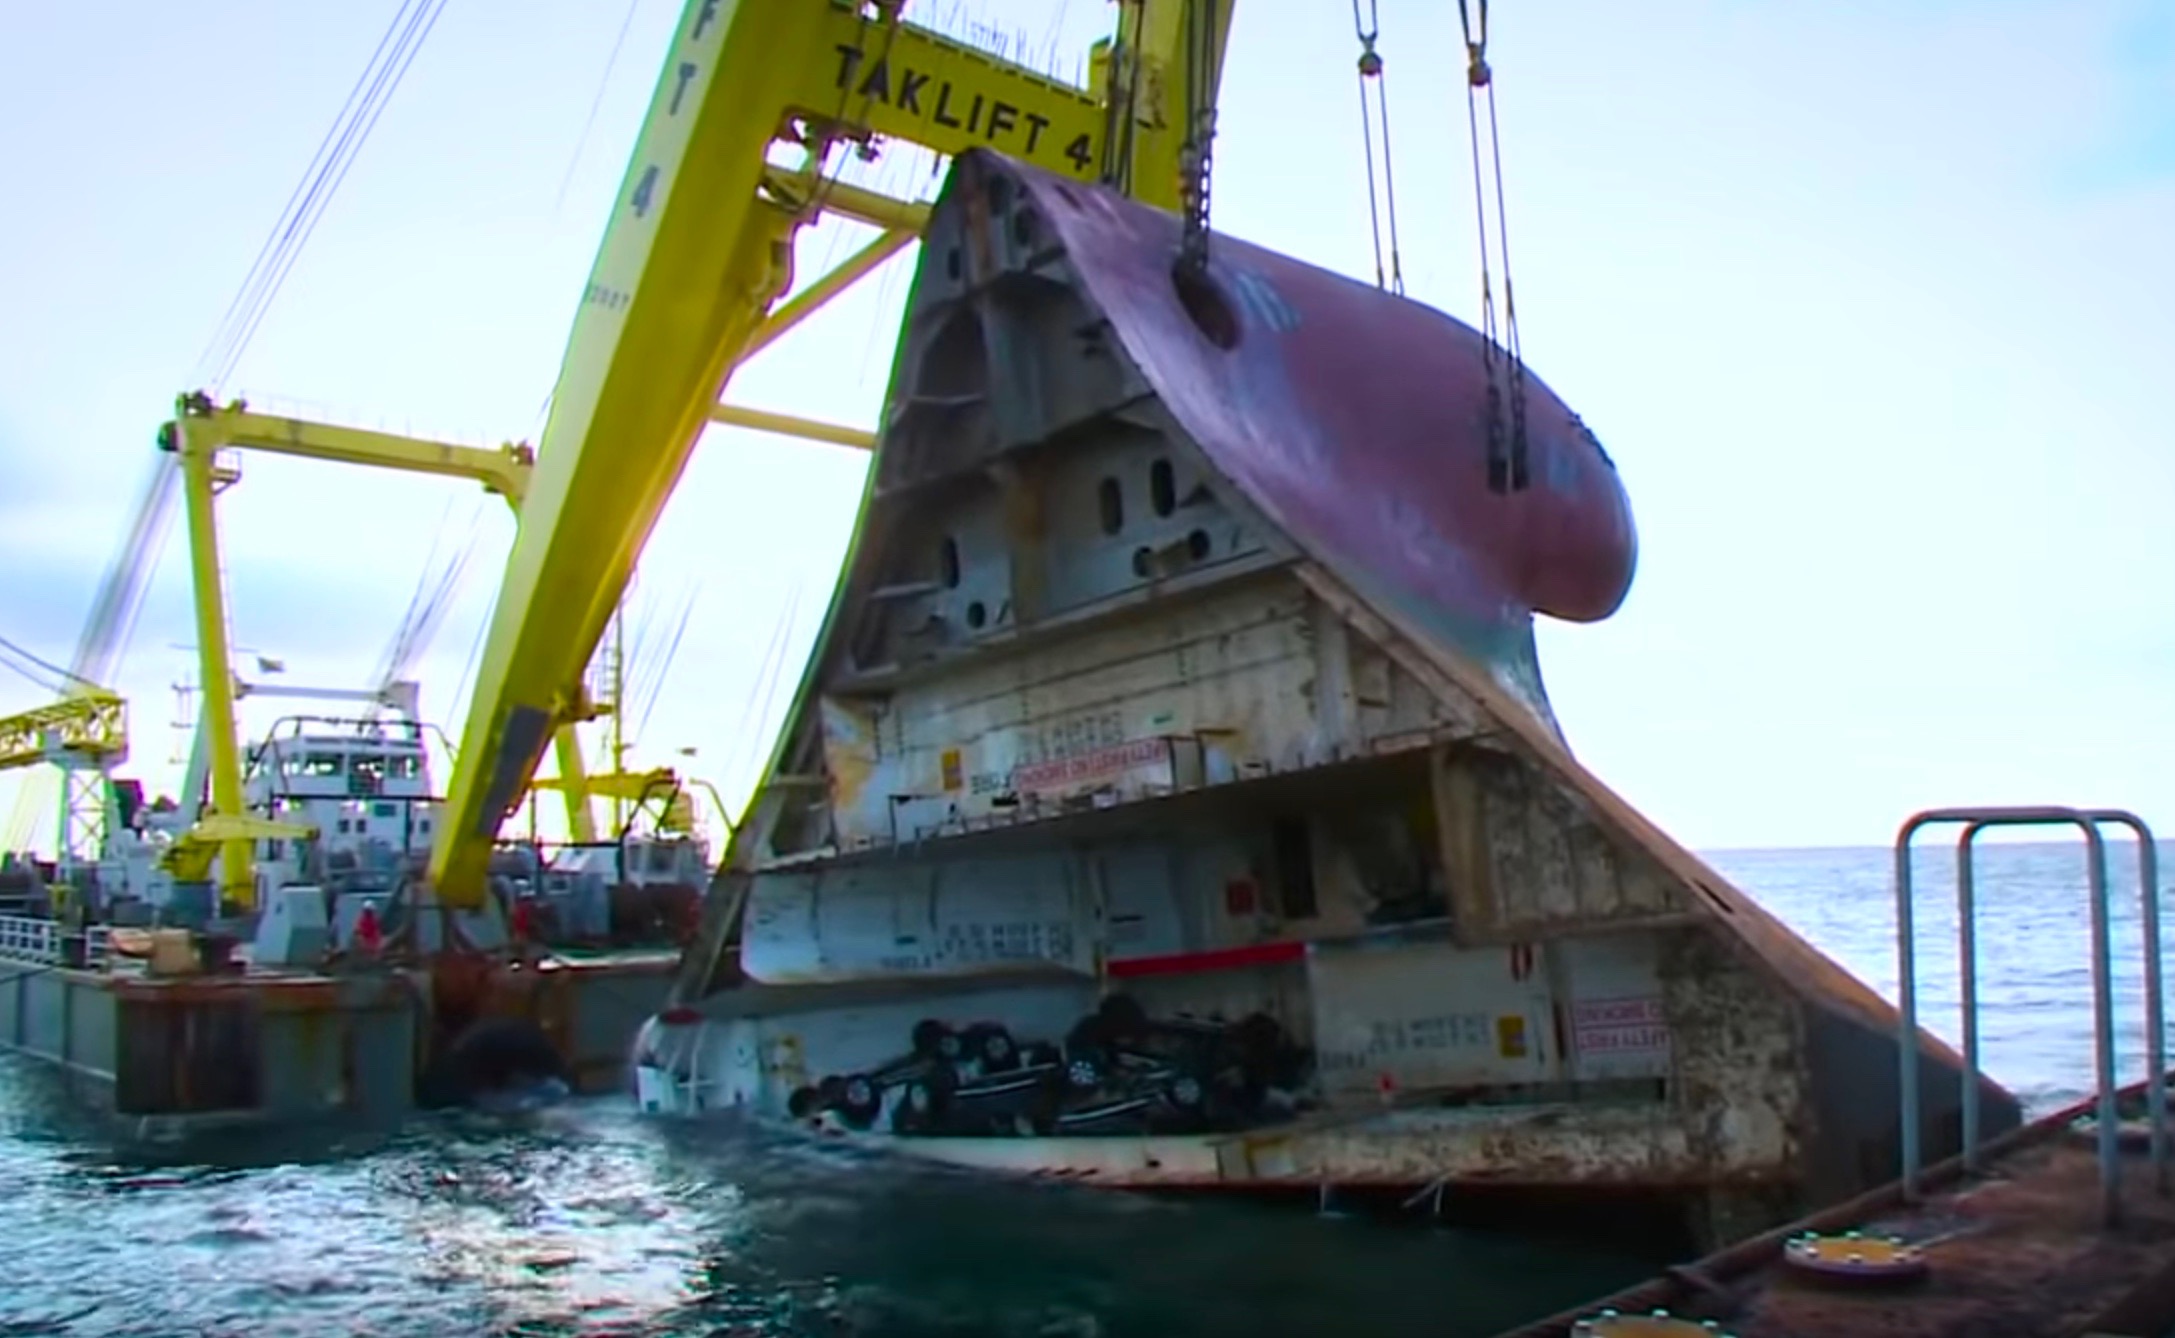 Video: How they recovered 1400 cars from sunken Baltic Ace ship